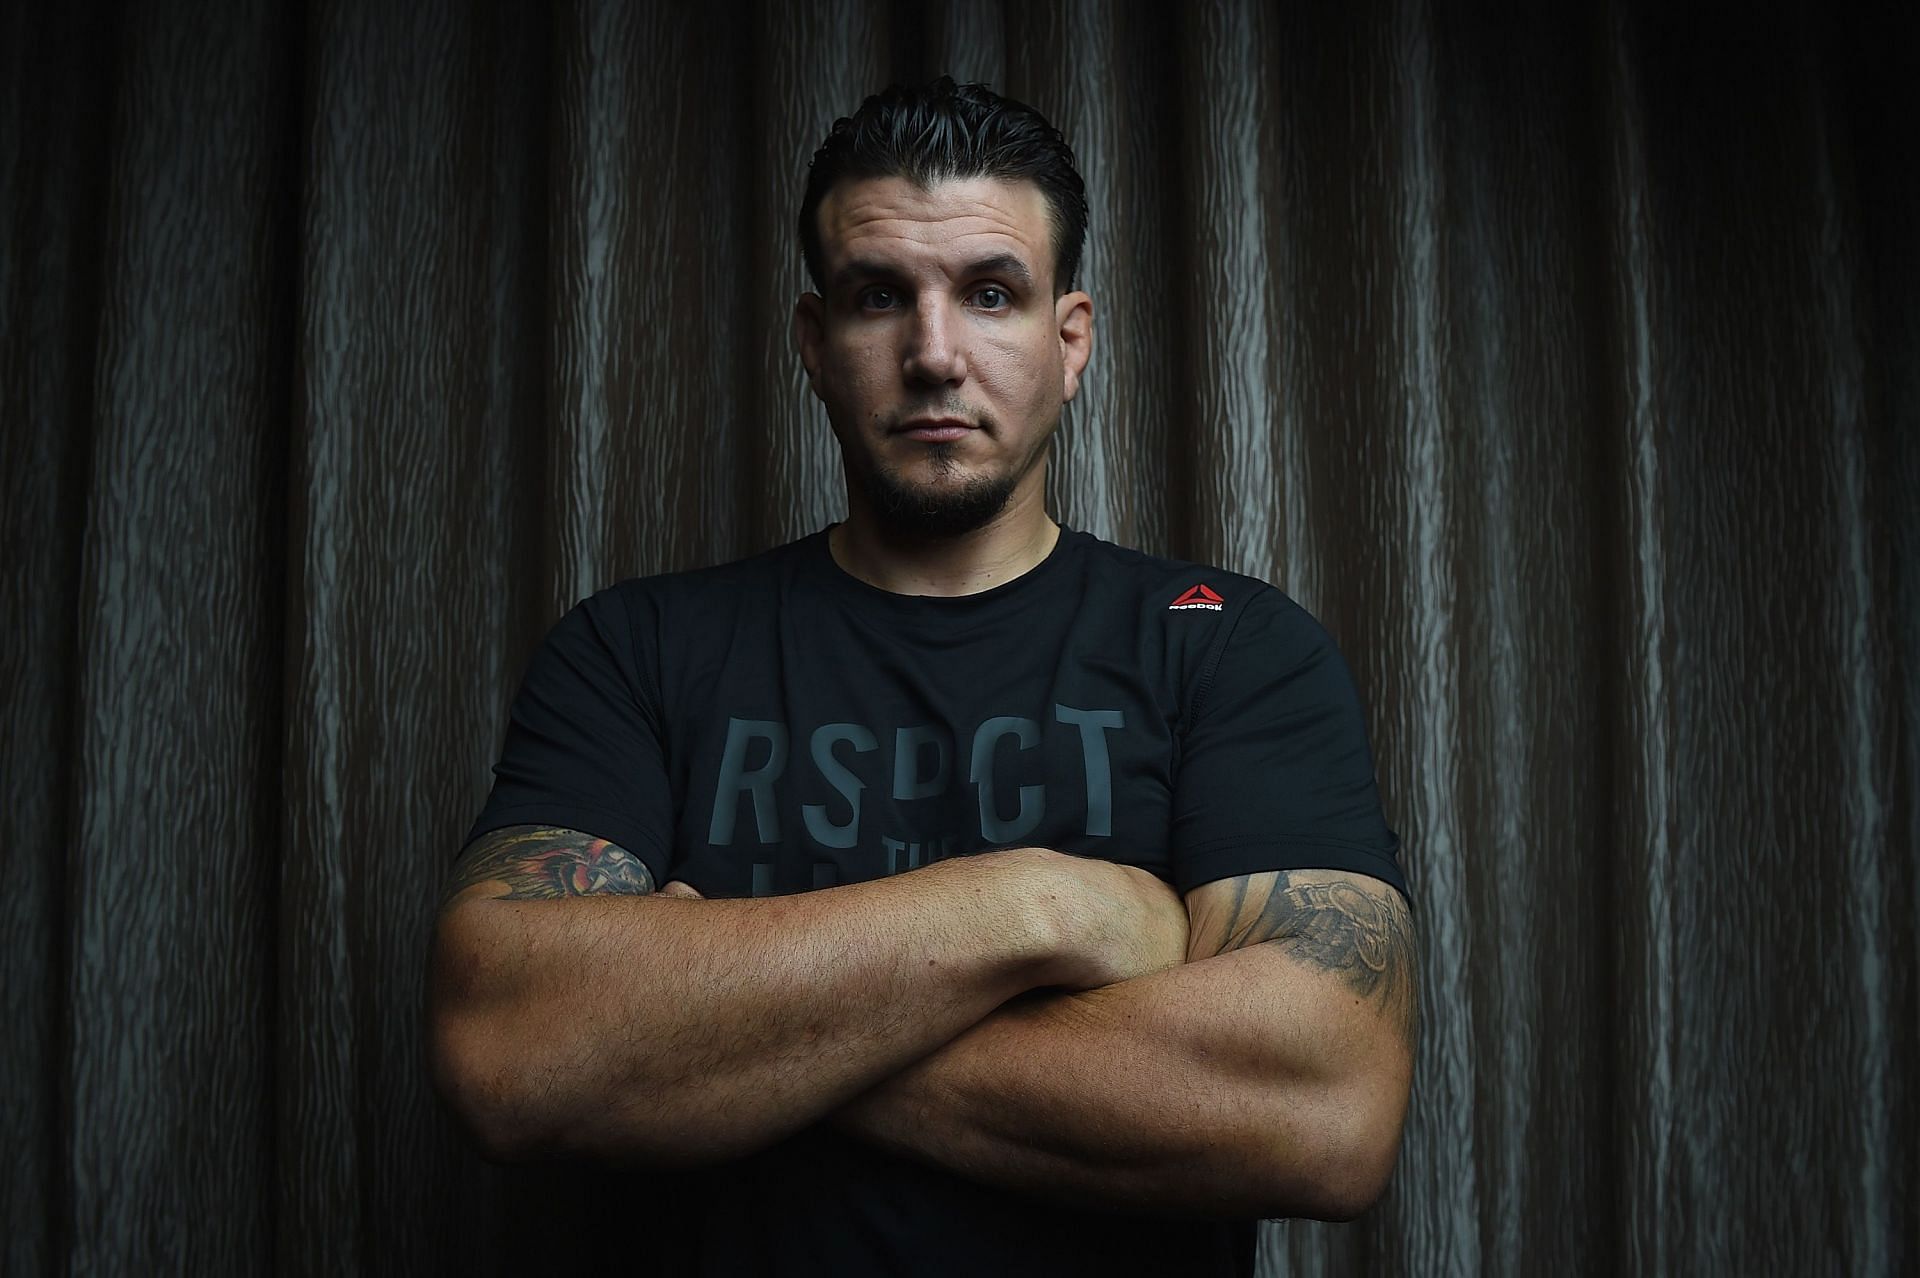 One of the most accomplished heavyweights in UFC history, Frank Mir deserves more respect from modern fans.